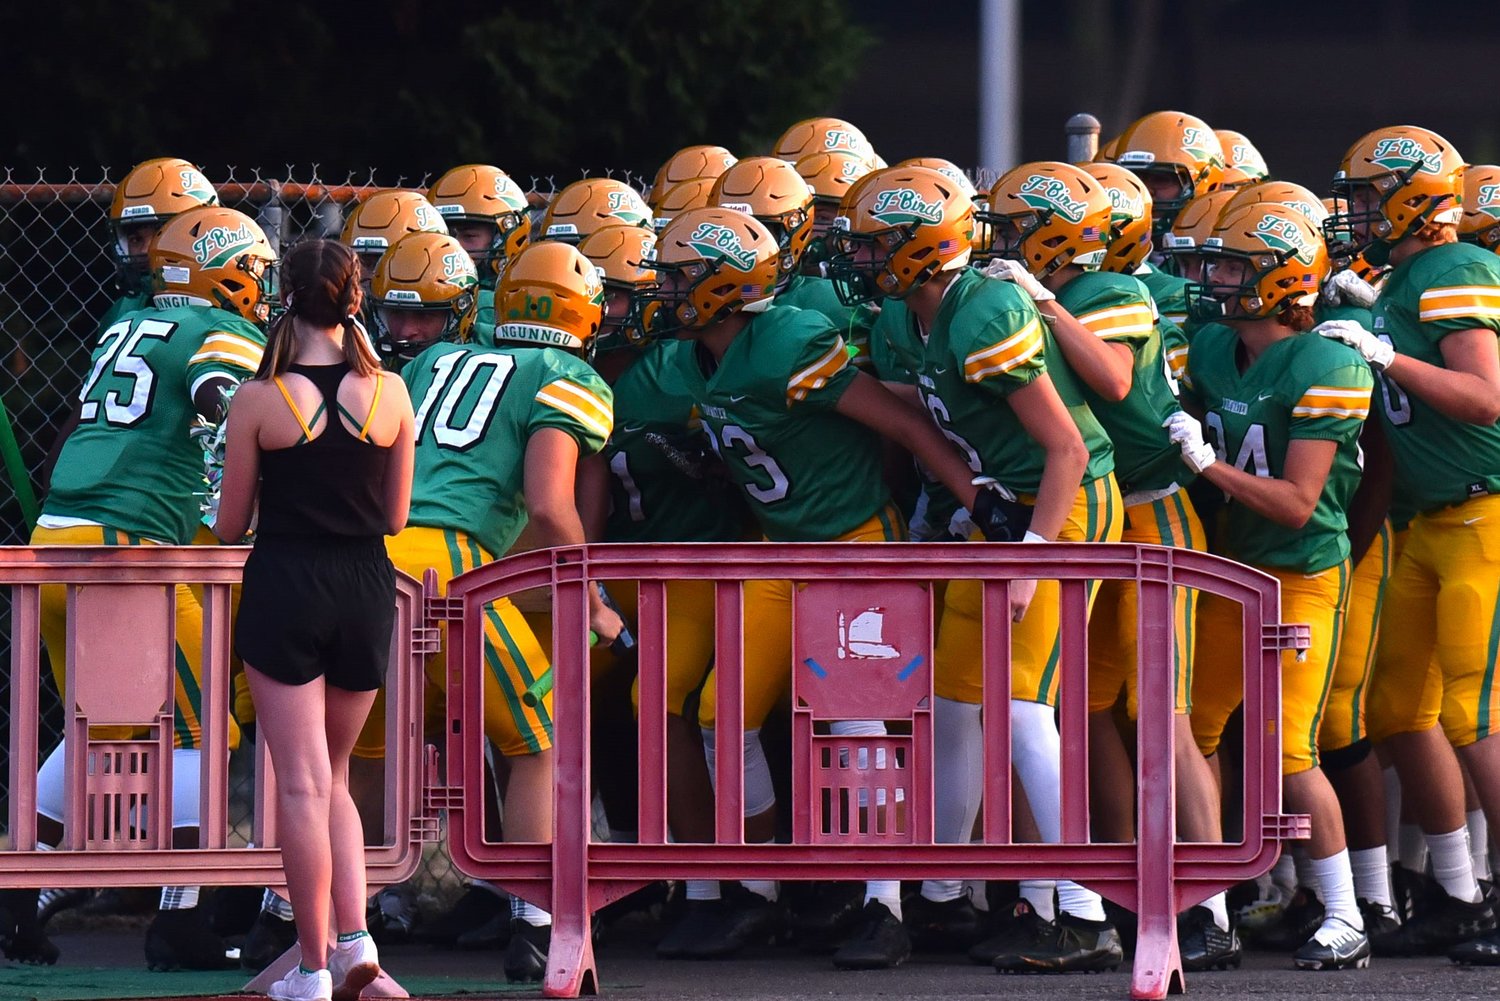 The Tumwater football team prepares to run out onto the field before its home opener against North Kitsap on Sept. 9.